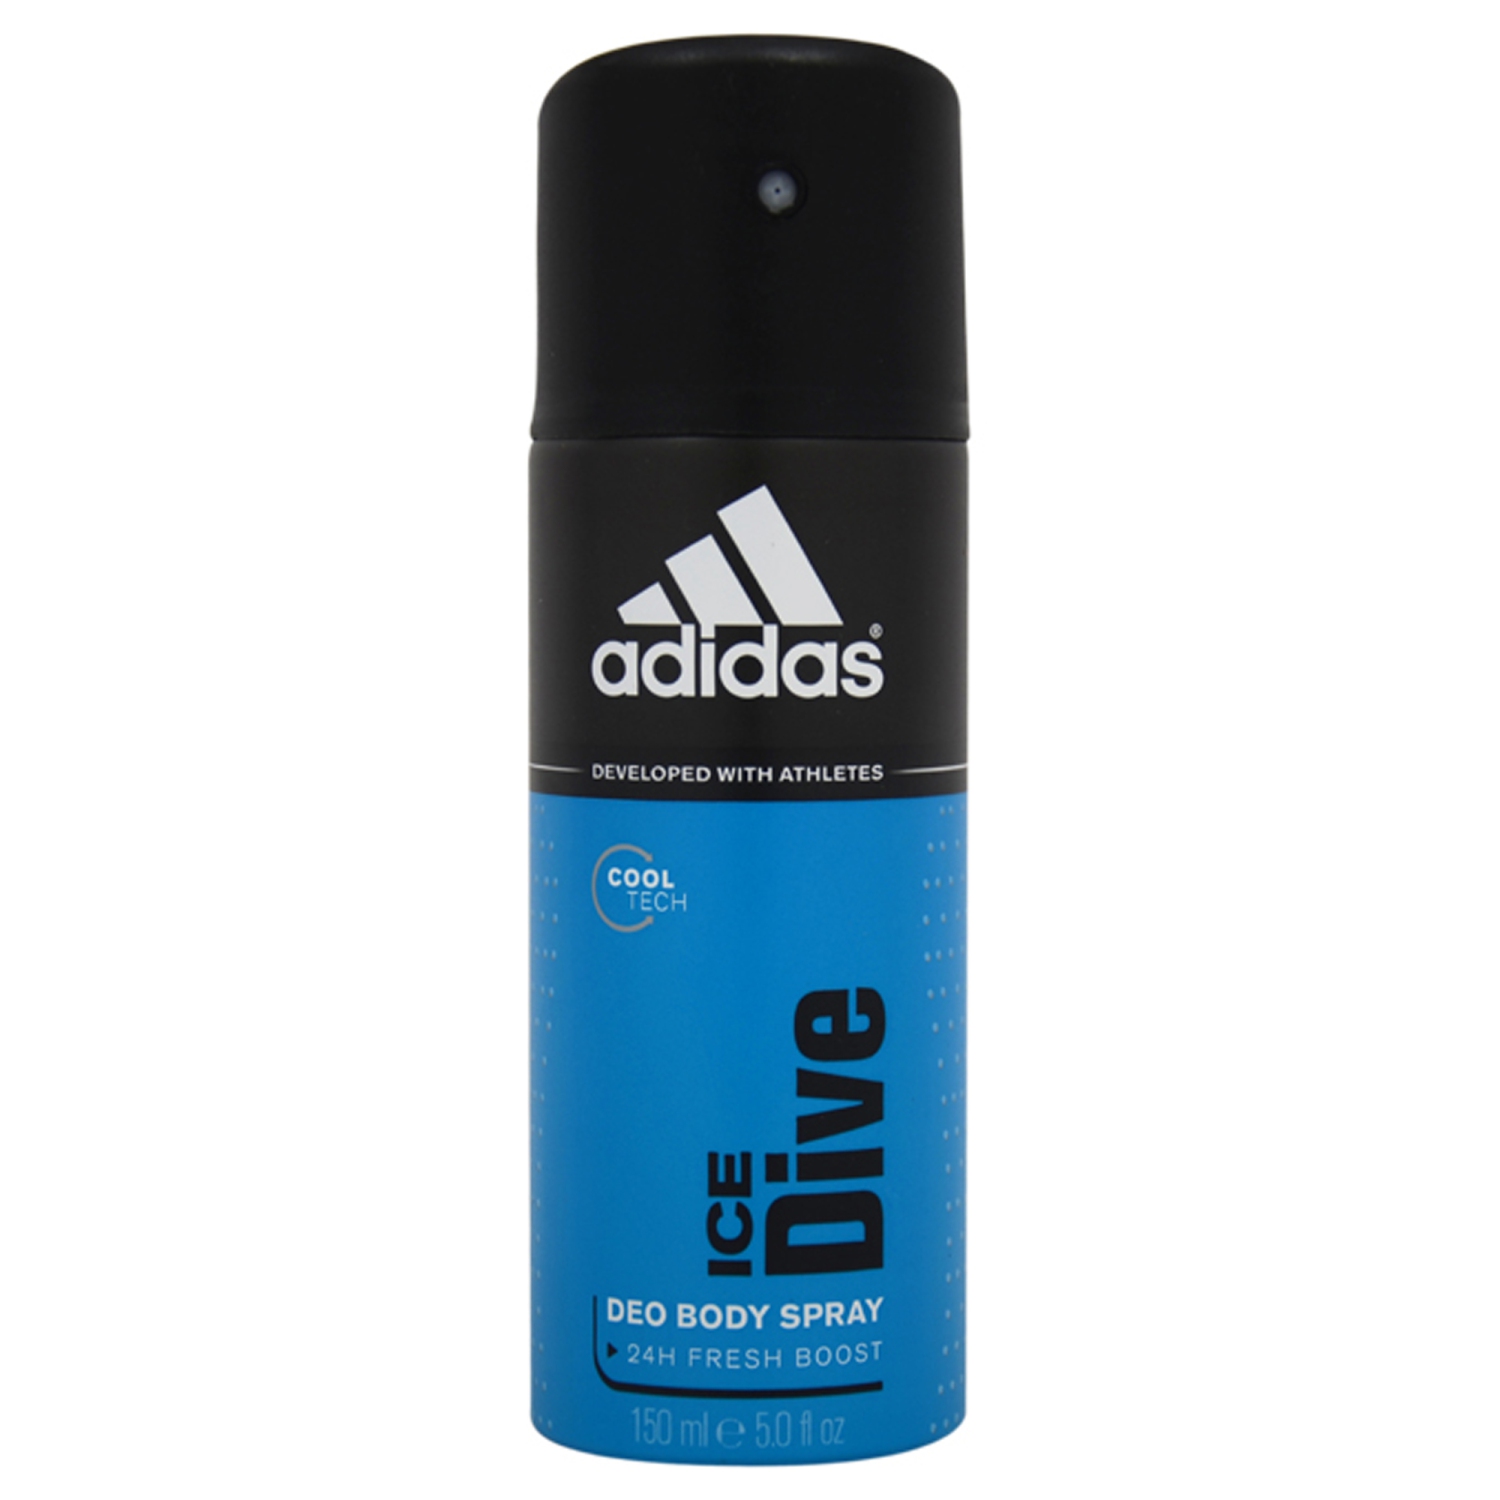 Adidas Ice Dive By Adidas 24h Deodorant Body Spray 5 Oz developed With Athletes